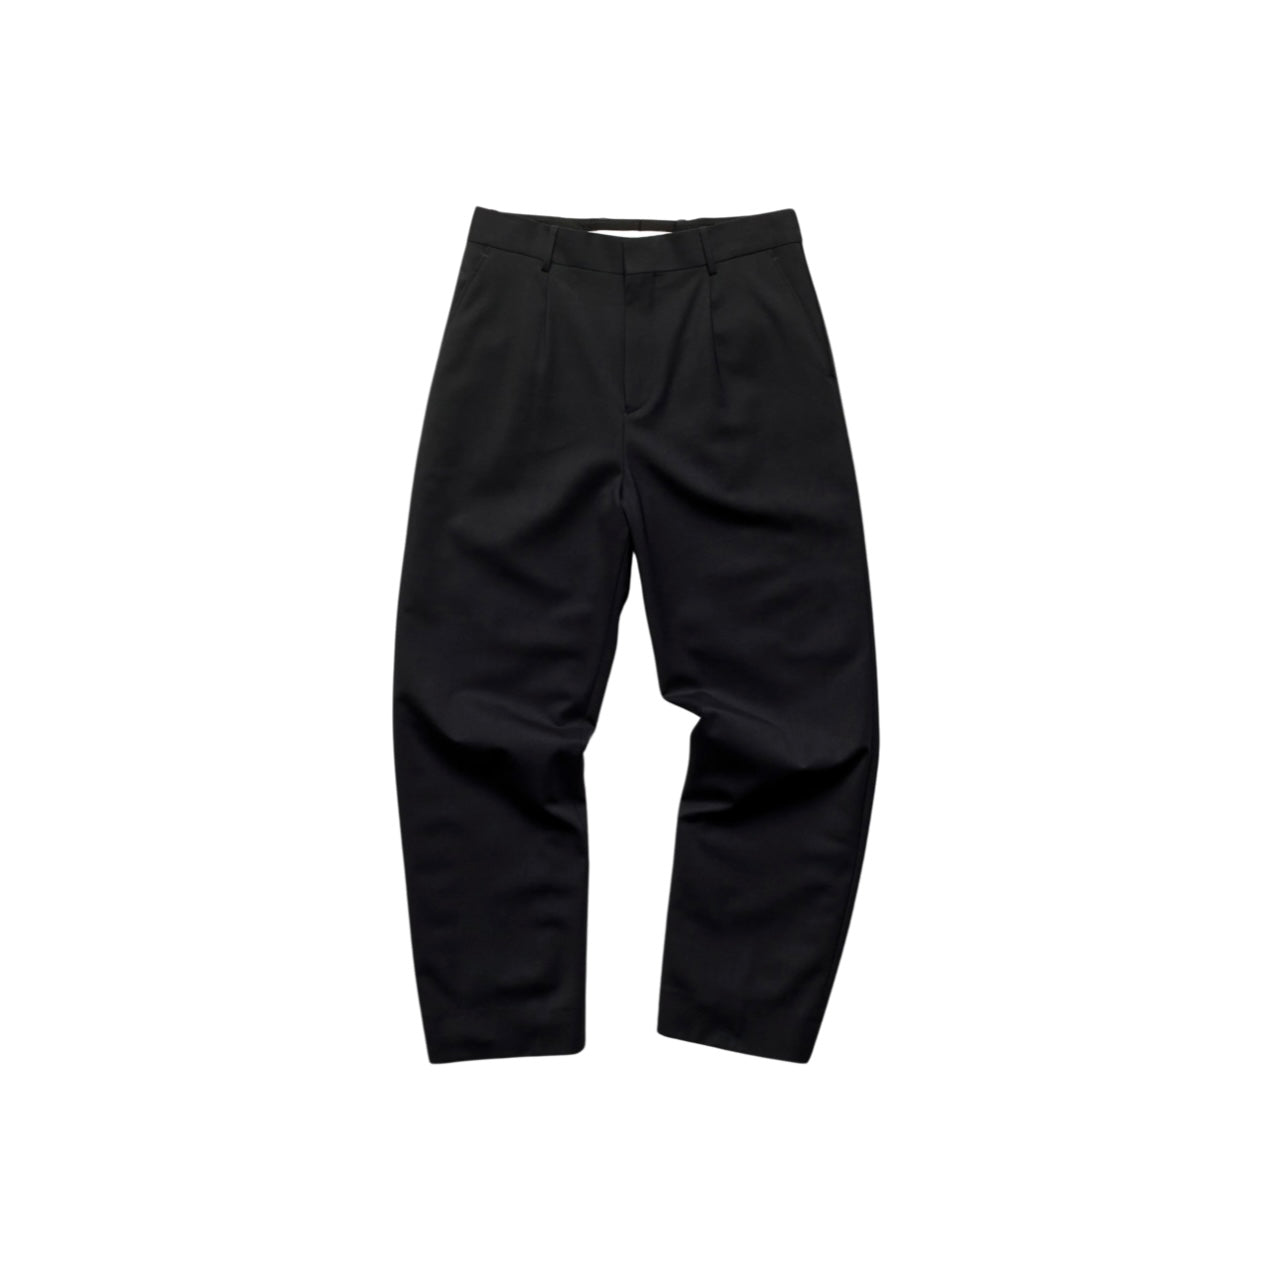 REIGNING CHAMP Twill Ivy Trouser